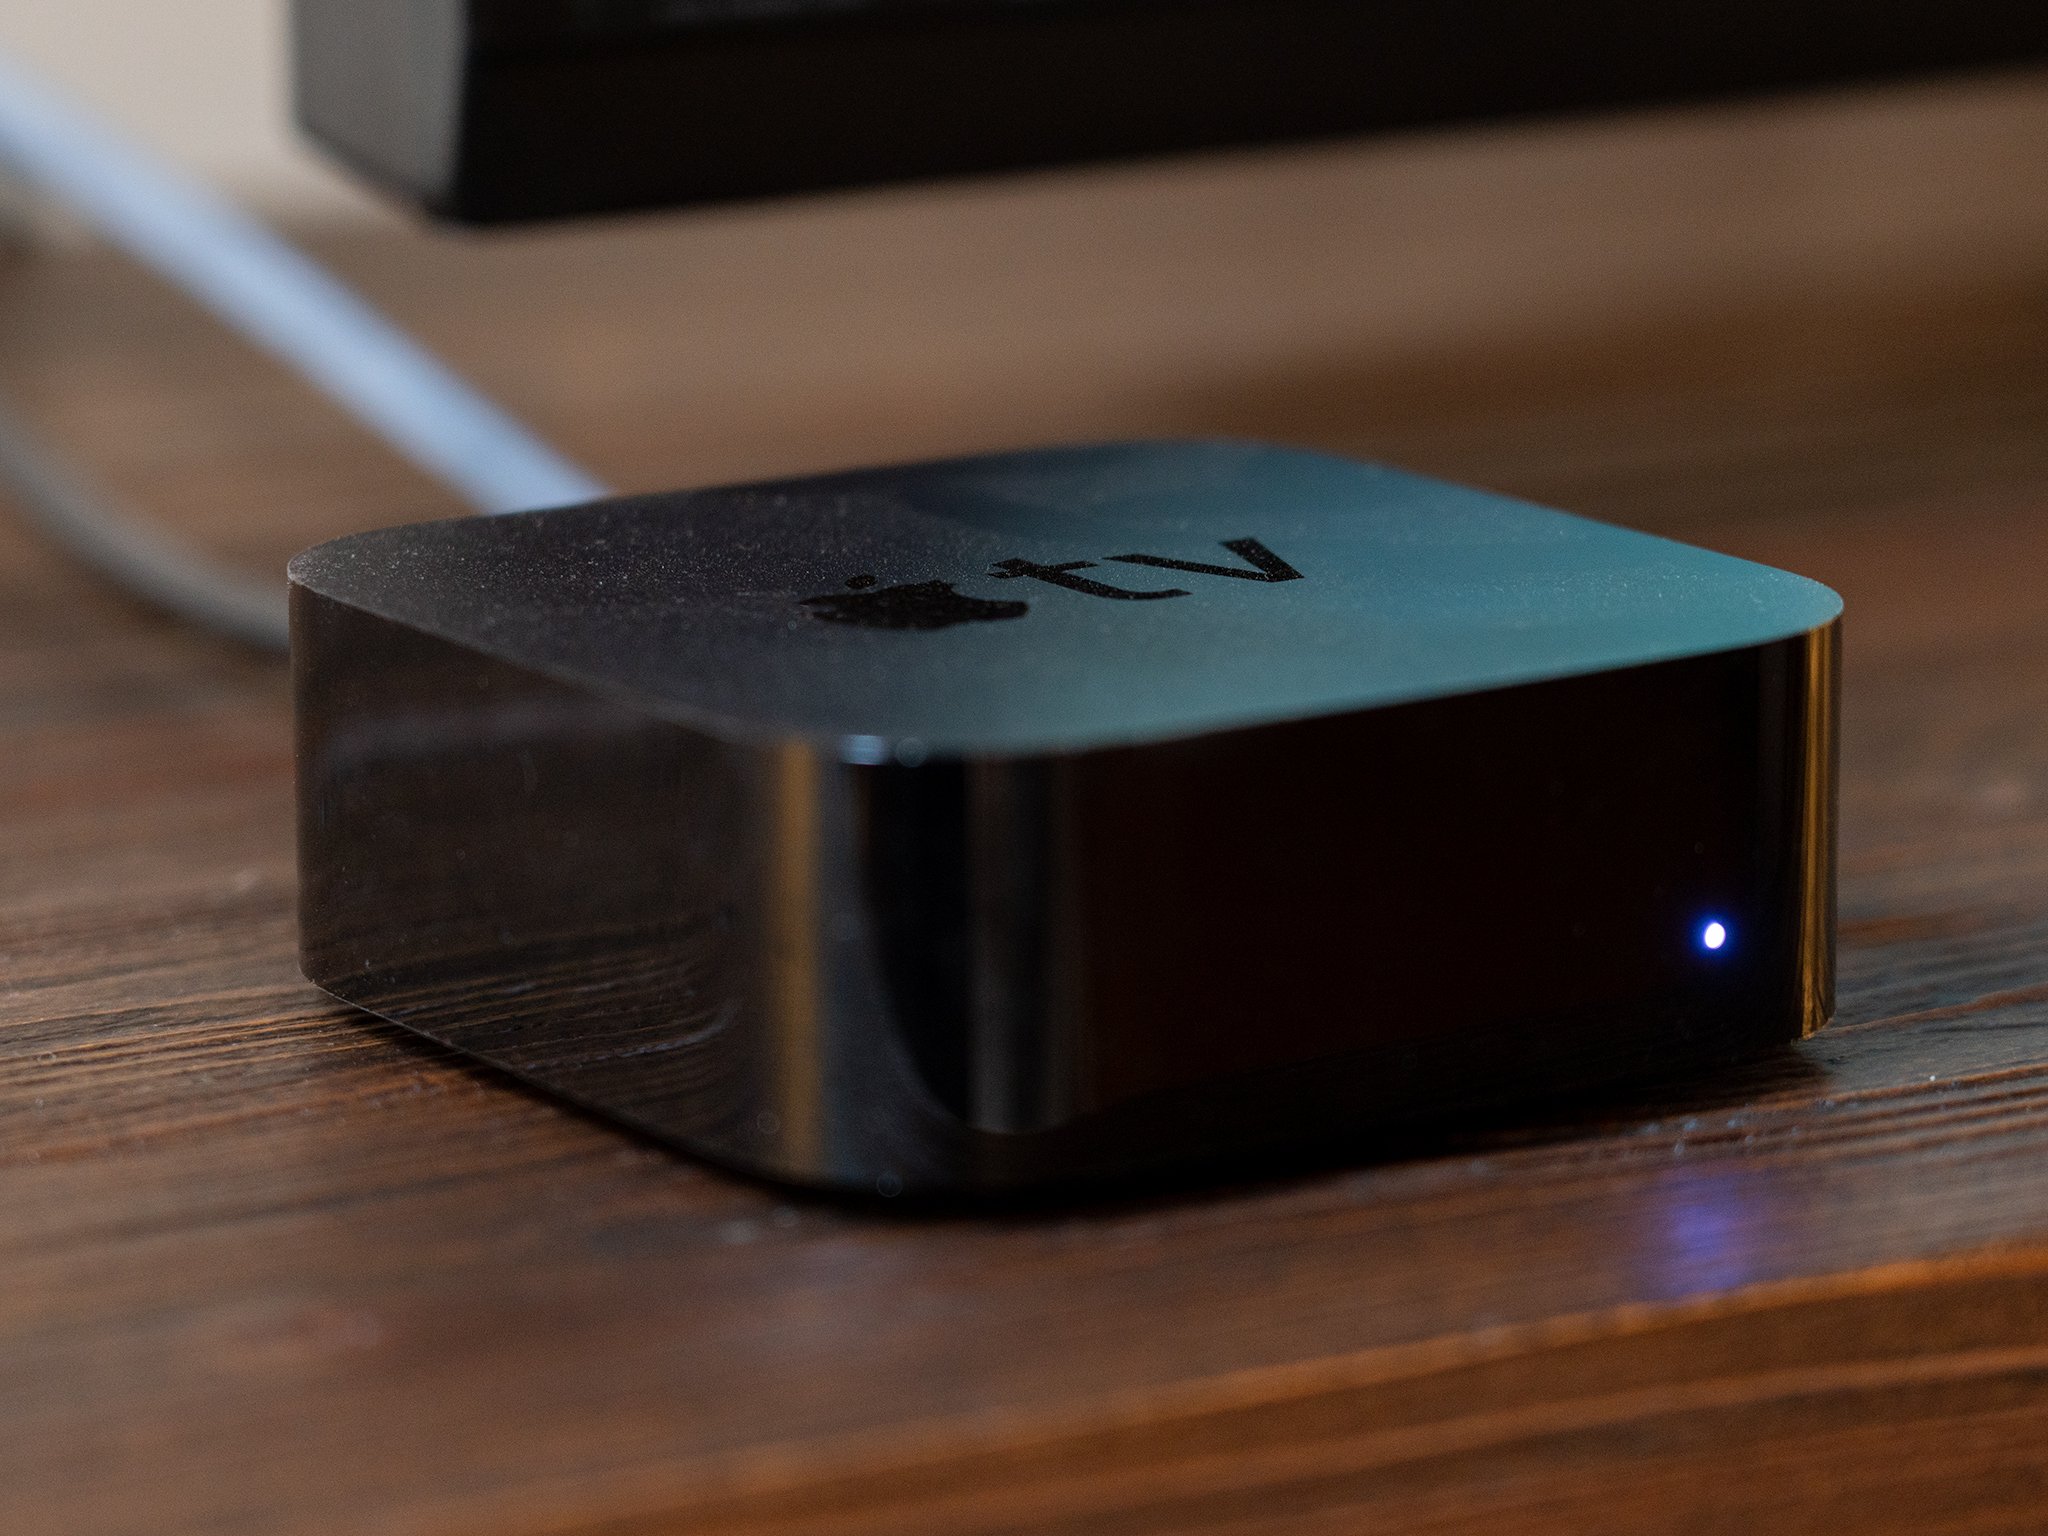 tvOS 15.4 provides assist for simply connecting Apple TV gadgets to resort Wi-Fi